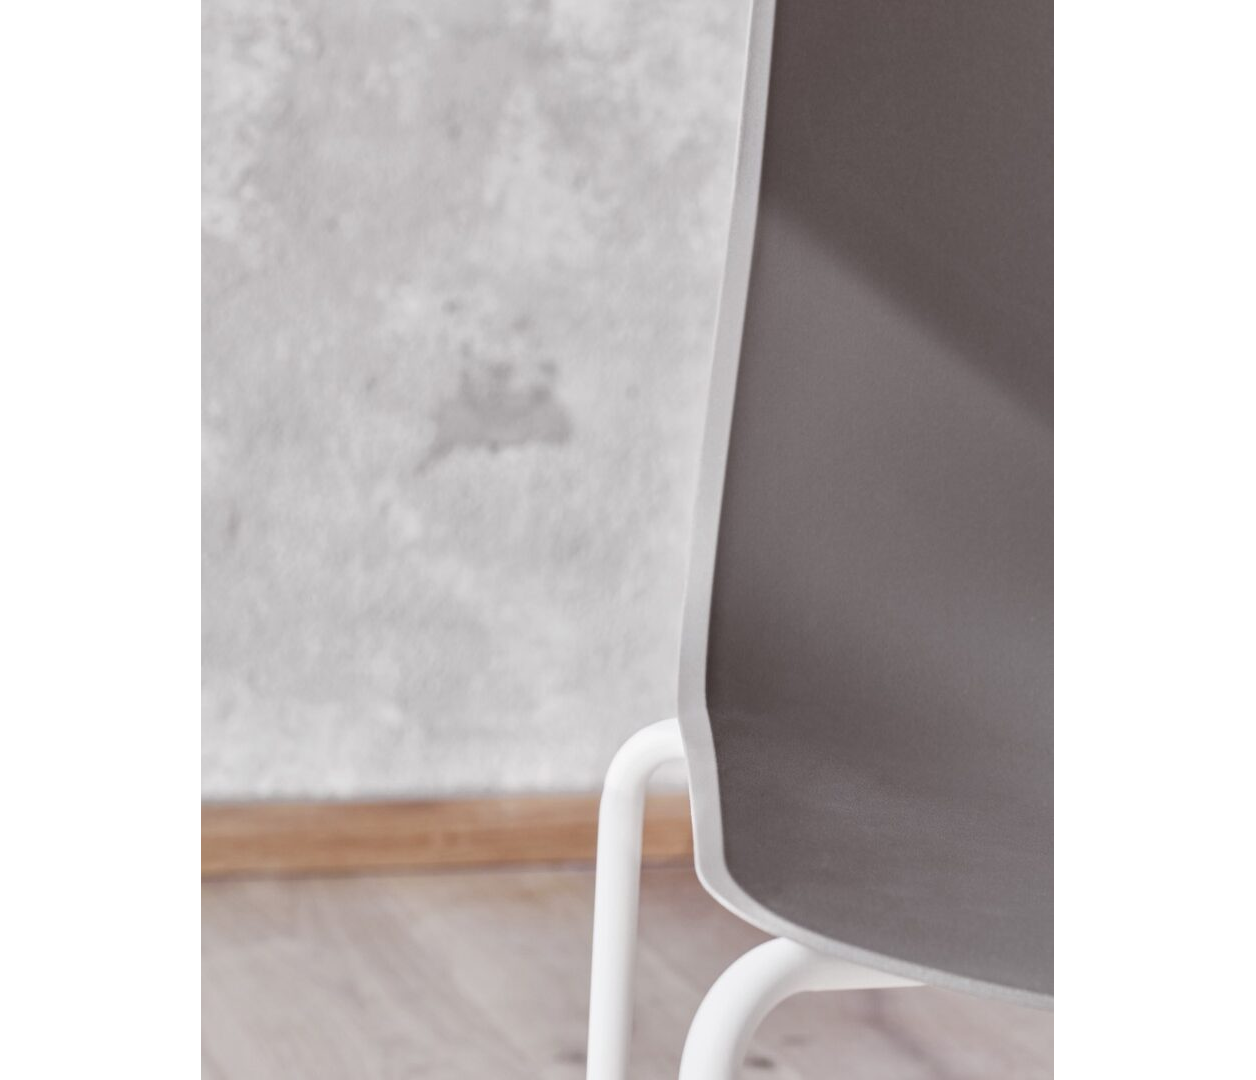 OCEE&FOUR – Chairs – FourSure 44 – Details Image 7 Large